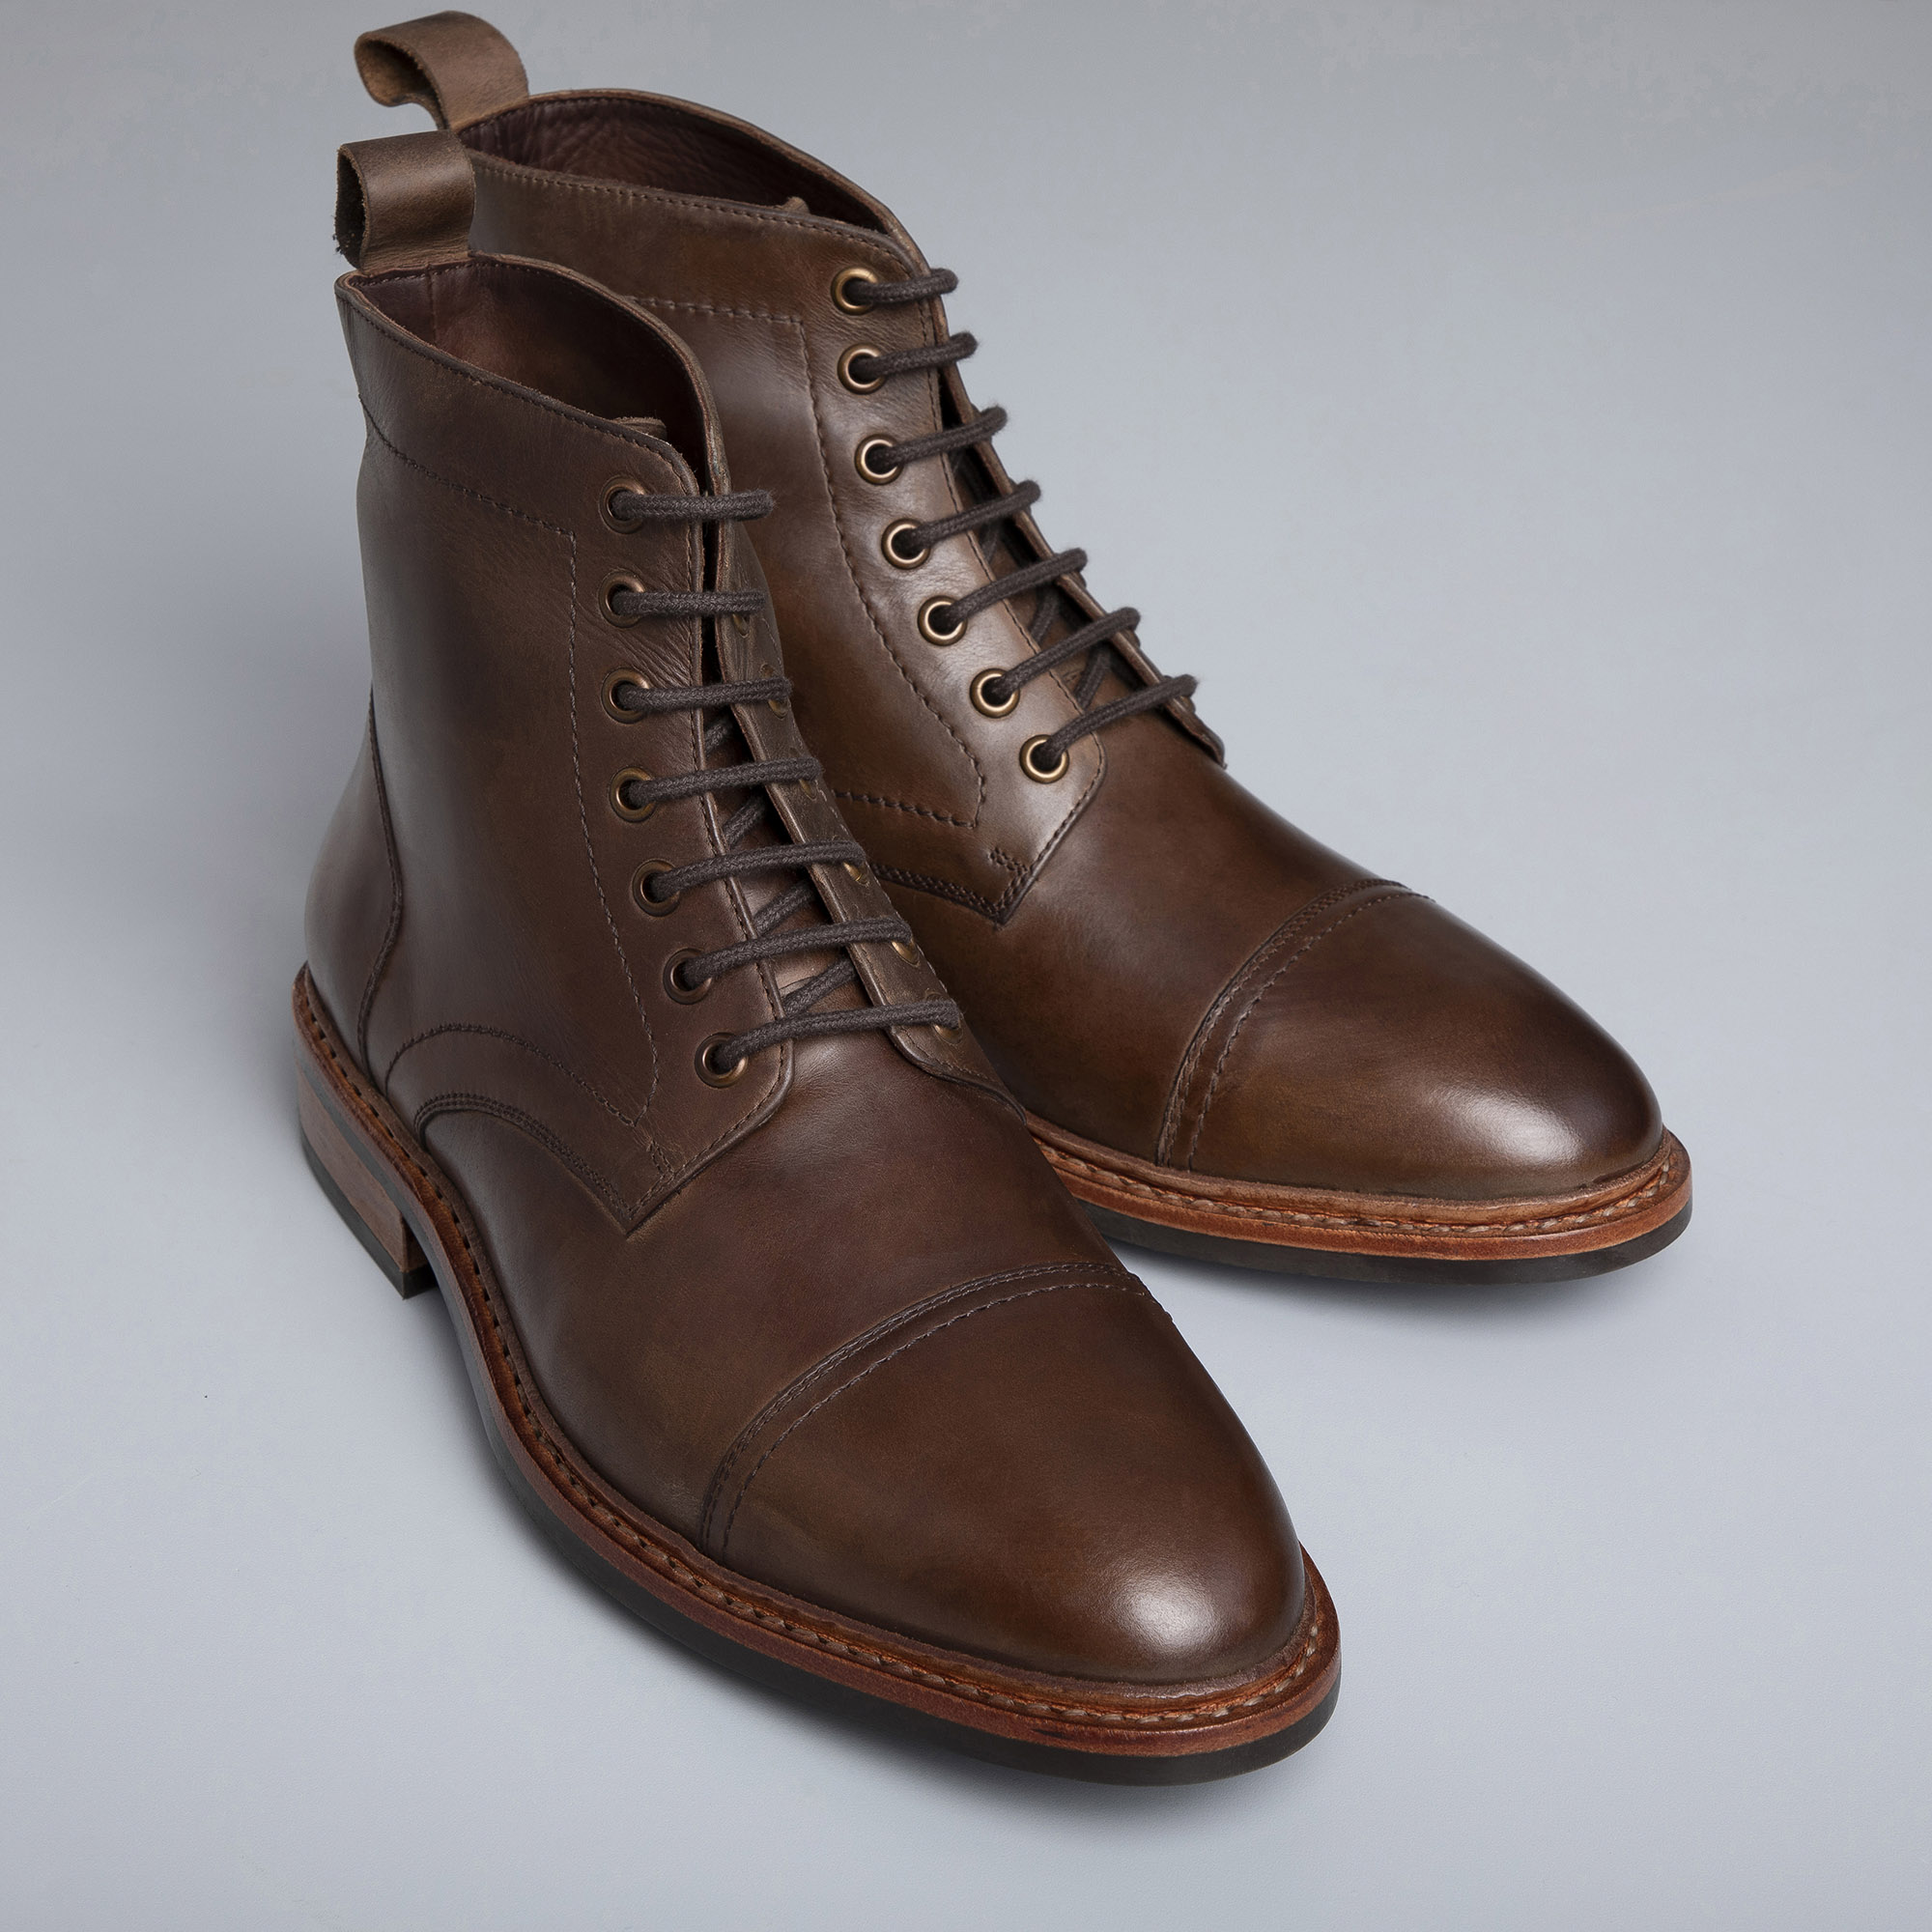 Mens brown leather cap toe boots